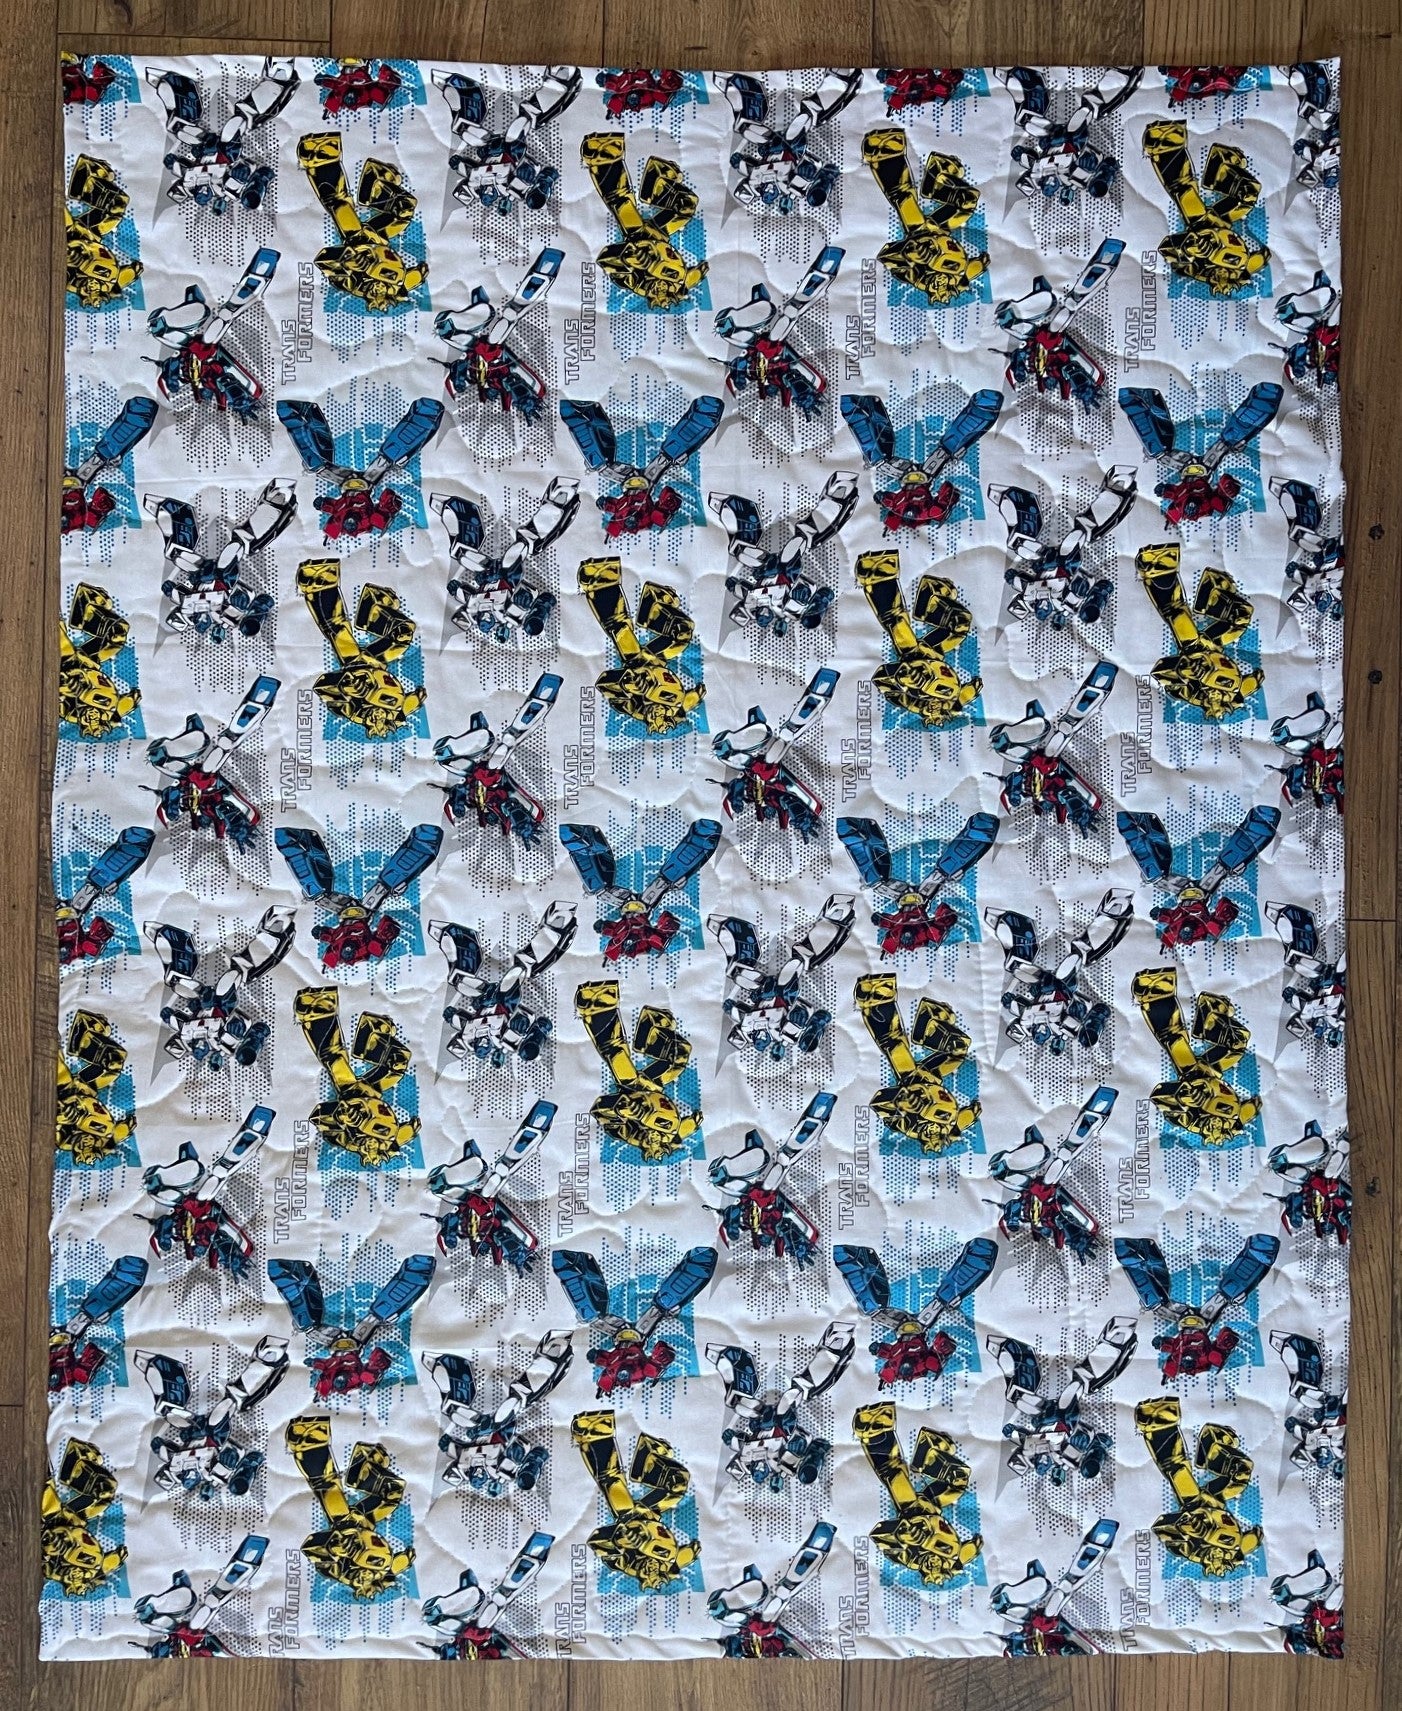 THE TRANSFORMERS *MORE THAN MEETS THE EYE* INSPIRED REVERSIBLE QUILTED BLANKET